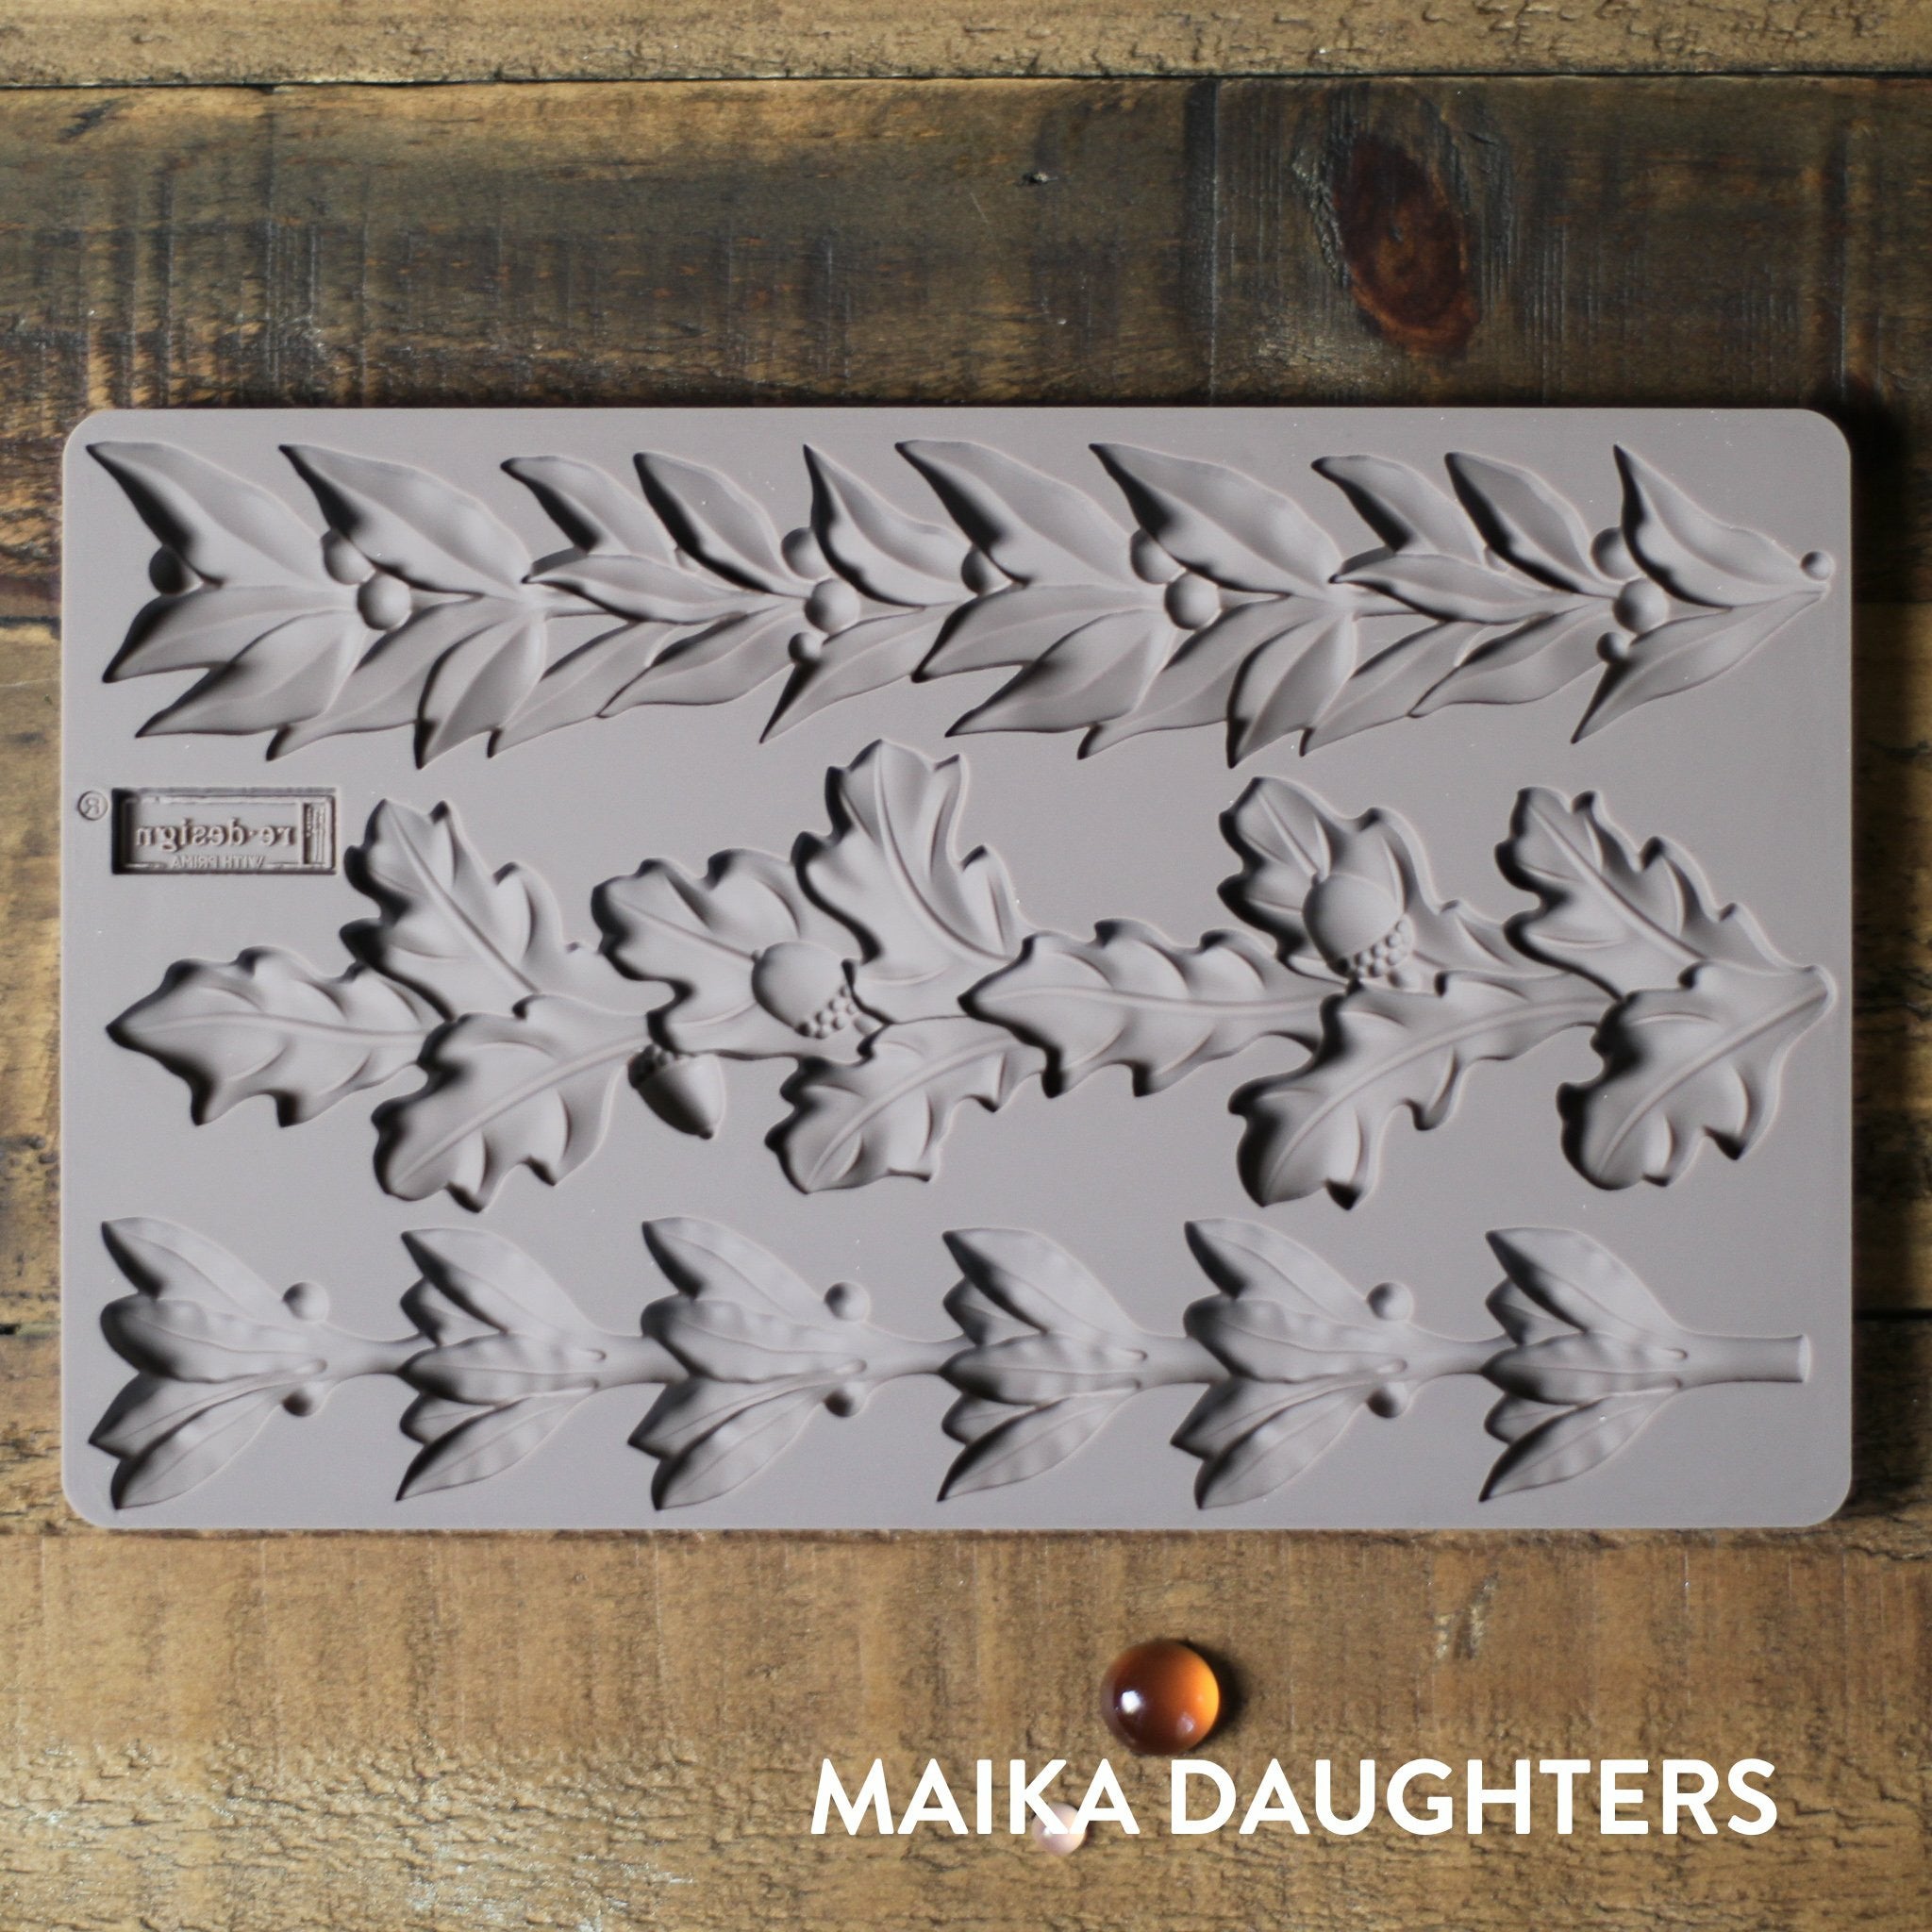 Wooden background with the Louelle Borders mold tray on top. A white Maika Daughters logo is in the bottom right corner.